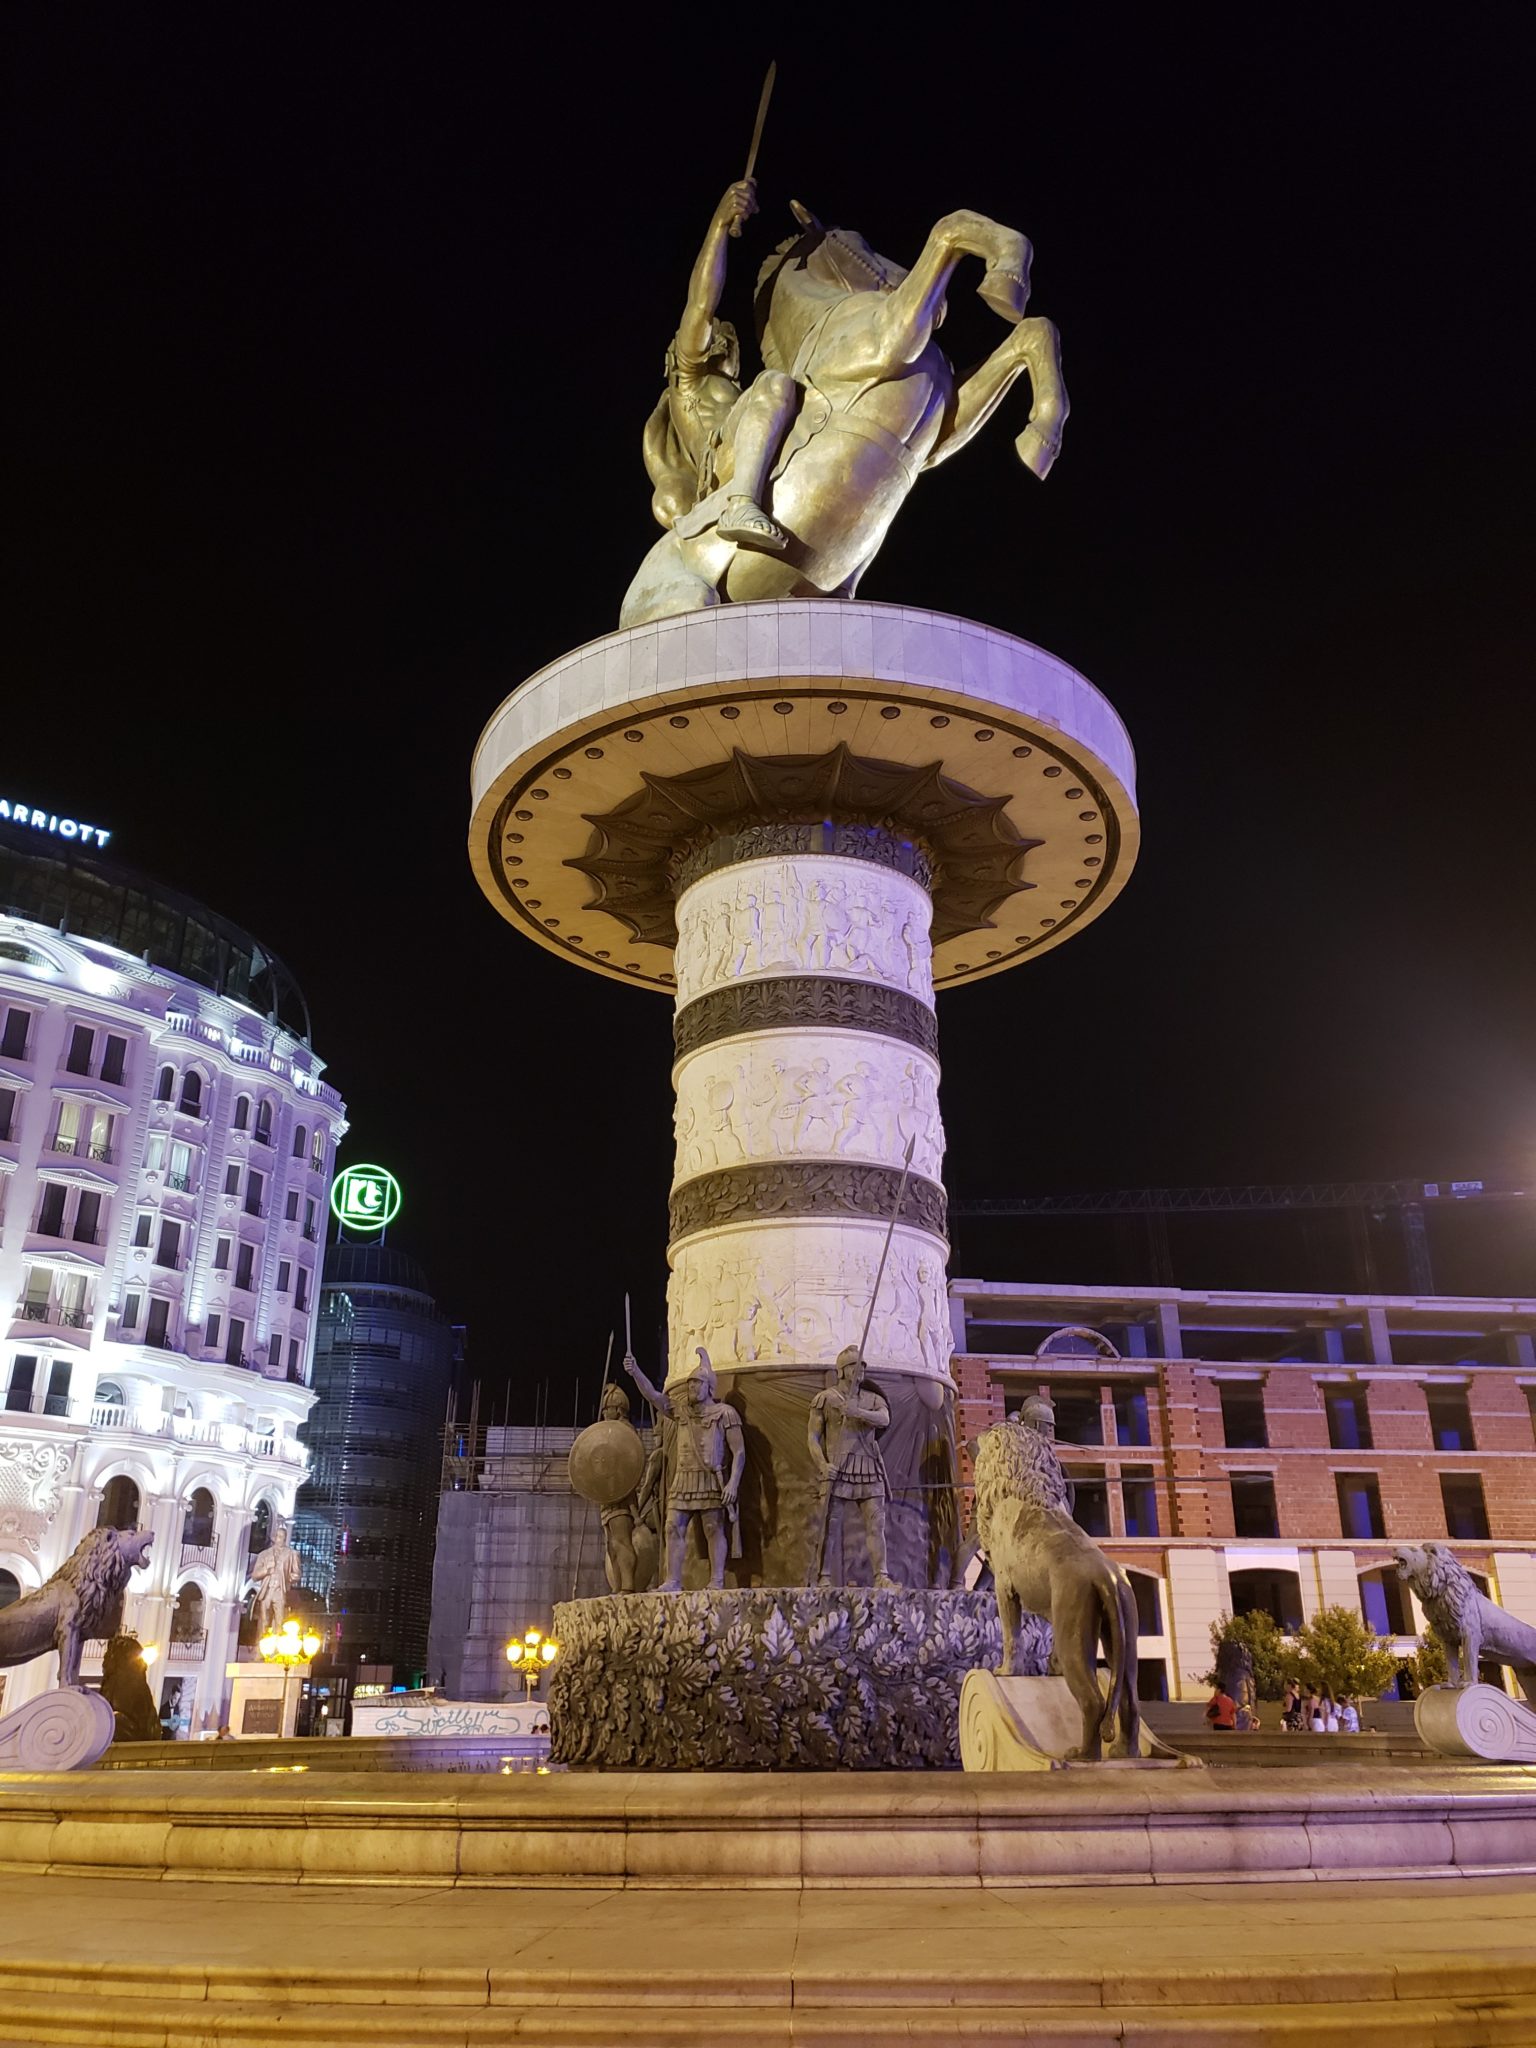 a statue of a man riding a horse on a pedestal in a city